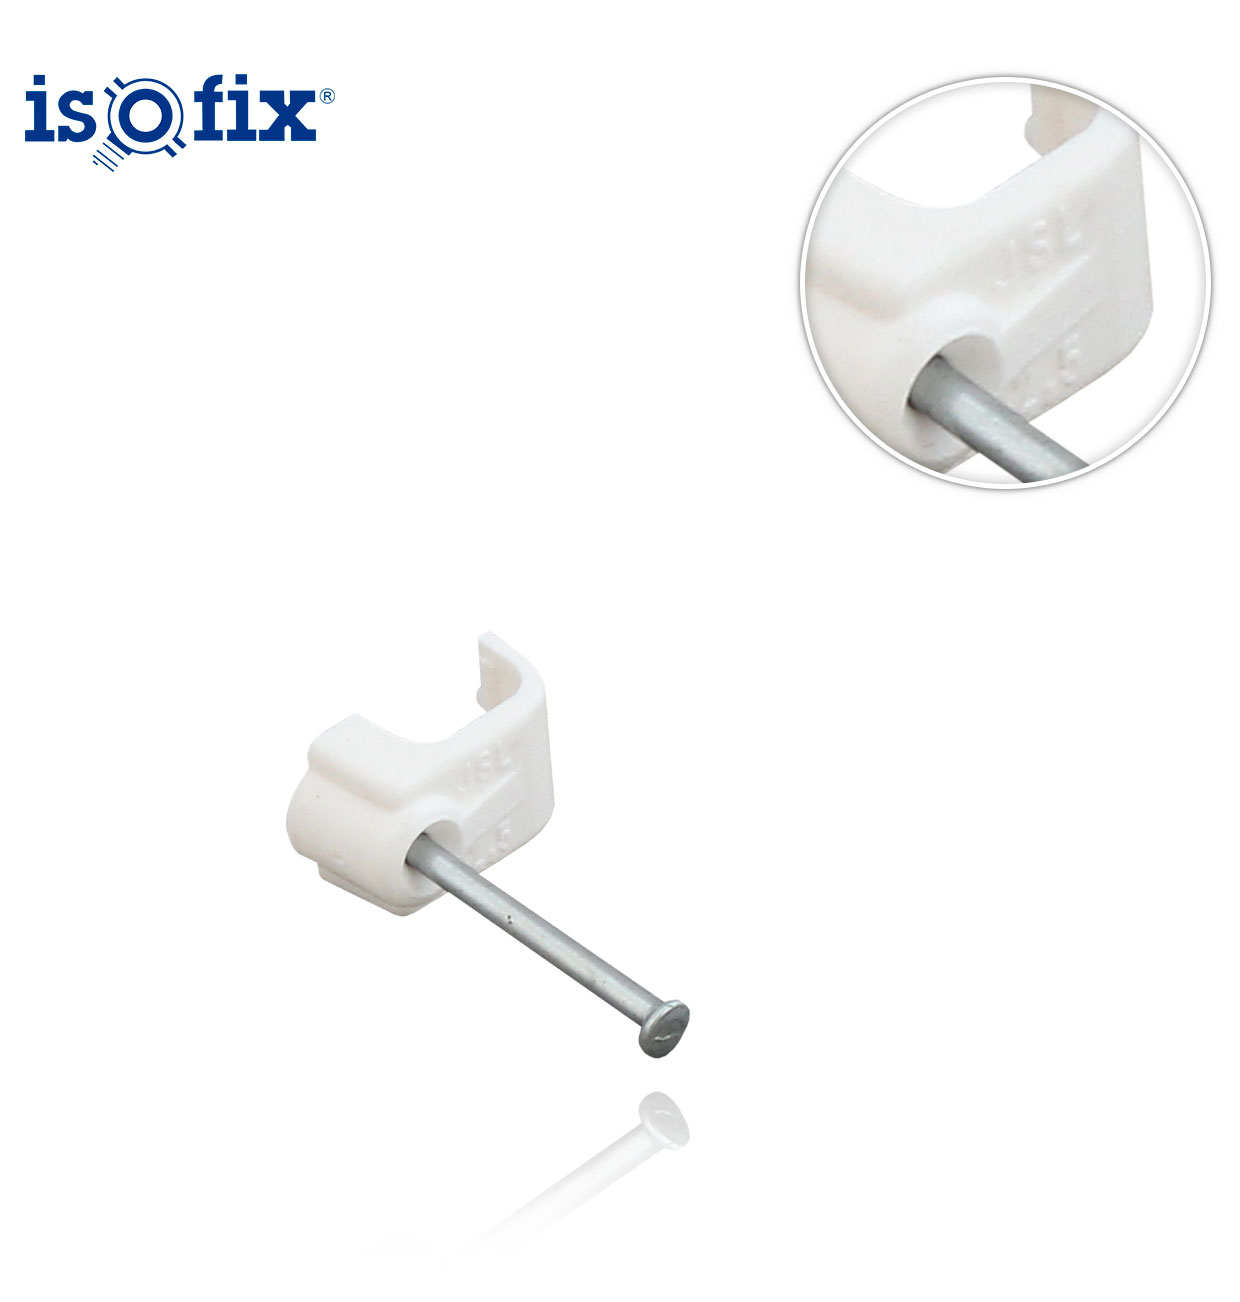 No. 2 WHITE CABLE CLIP 2x1.5-2x2.5 electrical fastener